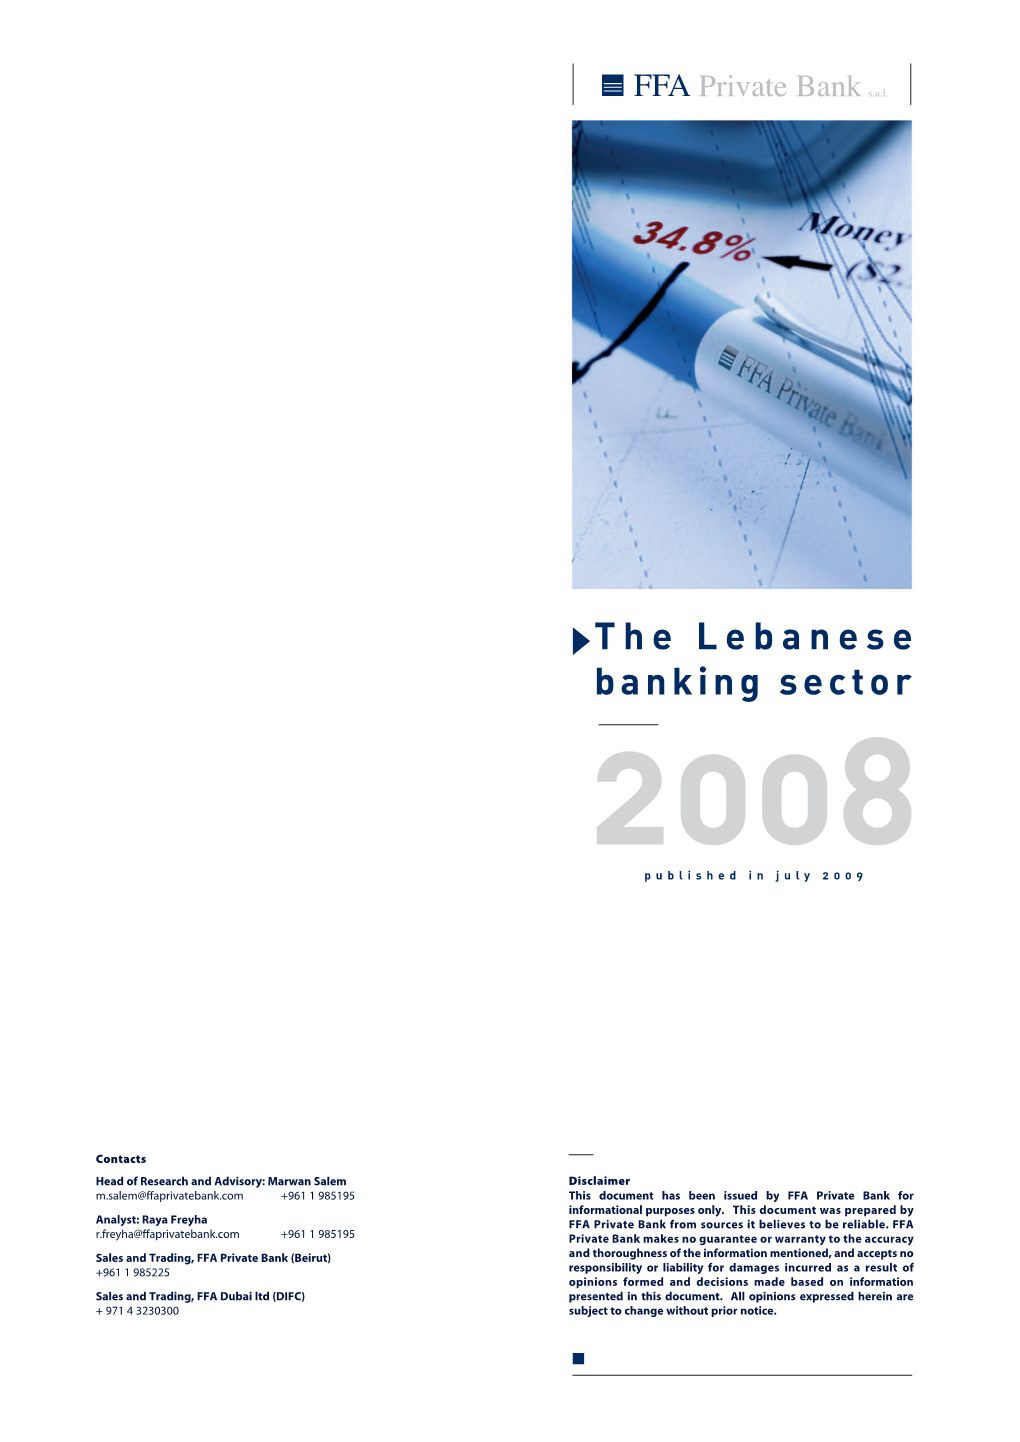 The Lebanese Banking Sector 2008